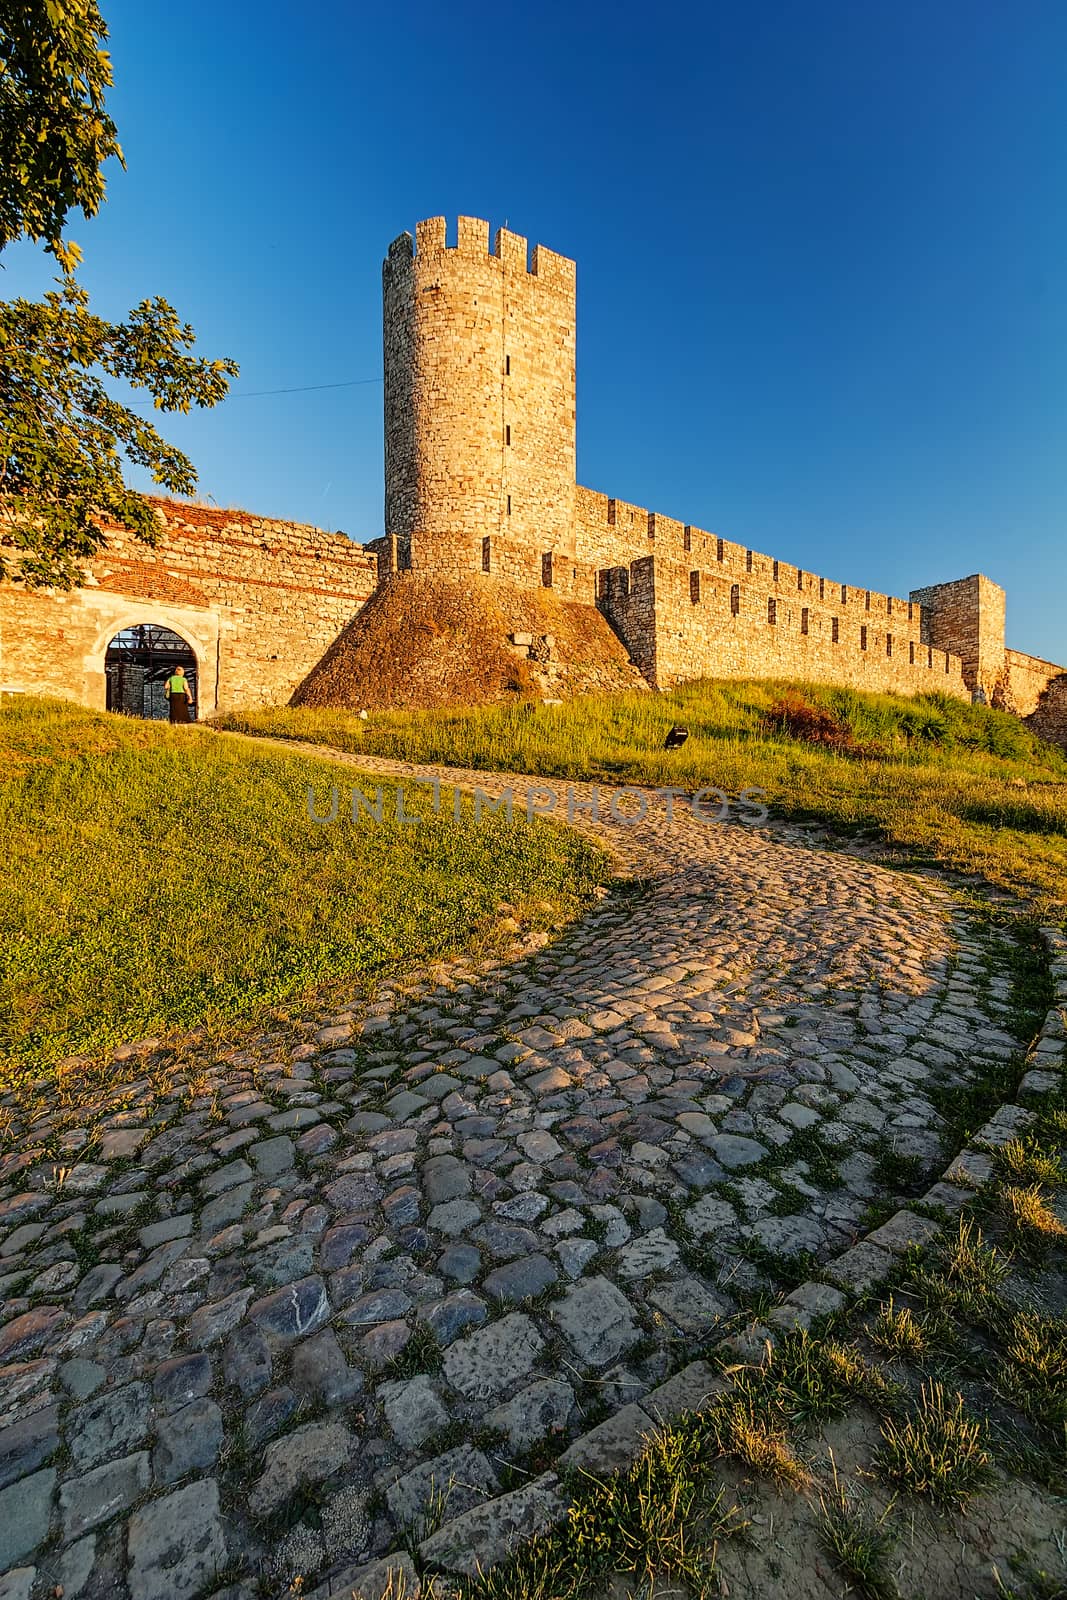 Belgrade fortress and Kalemegdan park with dramatic clouds 